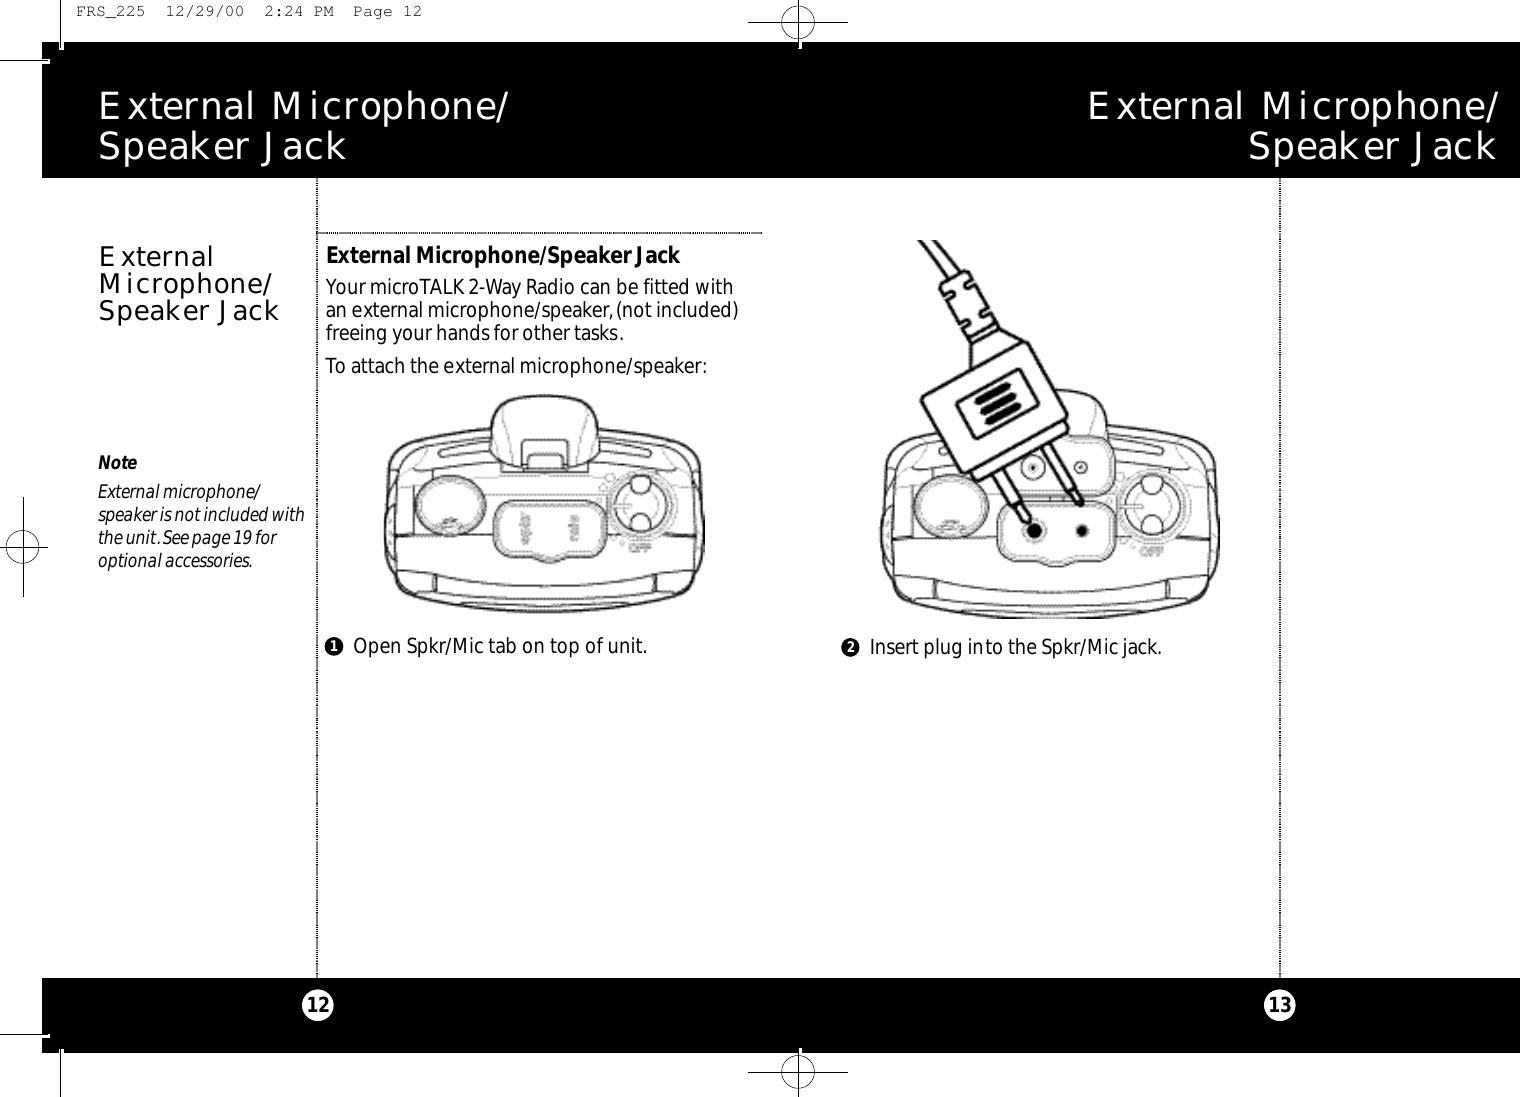 E x t e rnal Microphone/ Speaker Jack13E x t e rnal Microphone/ Speaker Jack12NoteExternal microphone/speaker is not included withthe unit.See page 19 foroptional accessories.External Microphone/Speaker JackYour microTALK 2-Way Radio can be fitted with an external microphone/speaker,(not included)freeing your hands for other tasks.To attach the external microphone/speaker:ExternalMicrophone/Speaker JackInsert plug into the Spkr/Mic jack.Open Spkr/Mic tab on top of unit.12 FRS_225  12/29/00  2:24 PM  Page 12